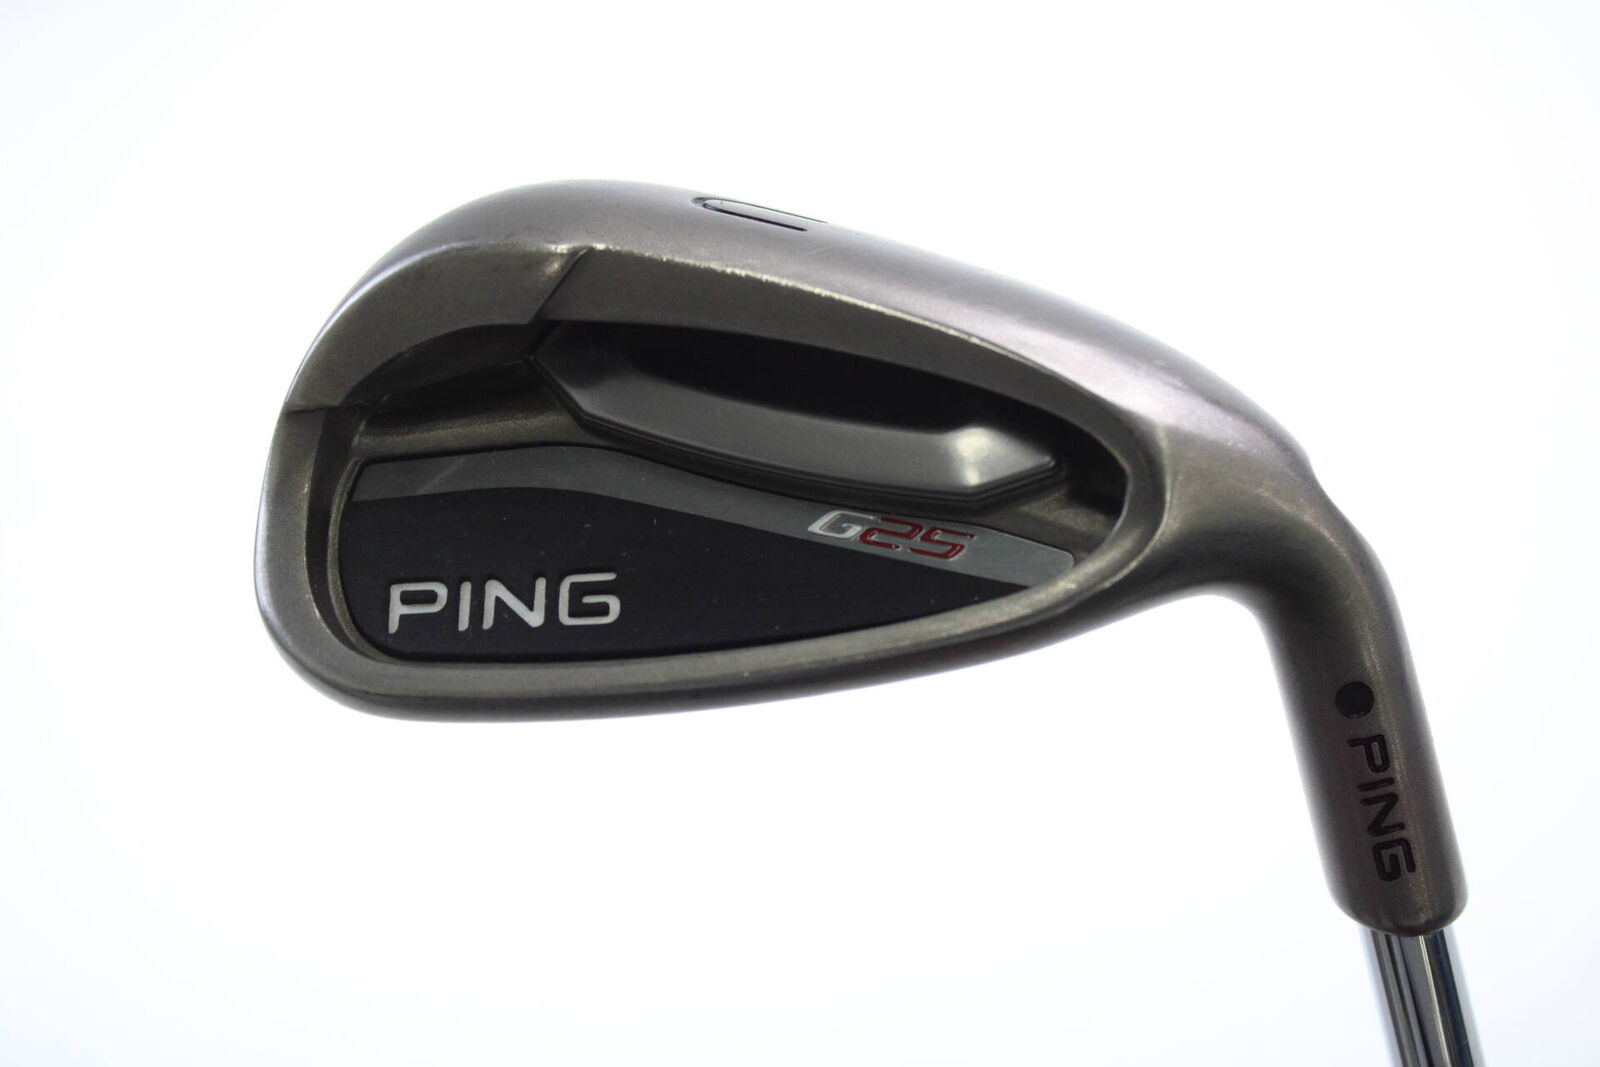 Ping G25 Iron Set 4-PW and UW Stiff Right-Handed Steel #8580 Golf Clubs